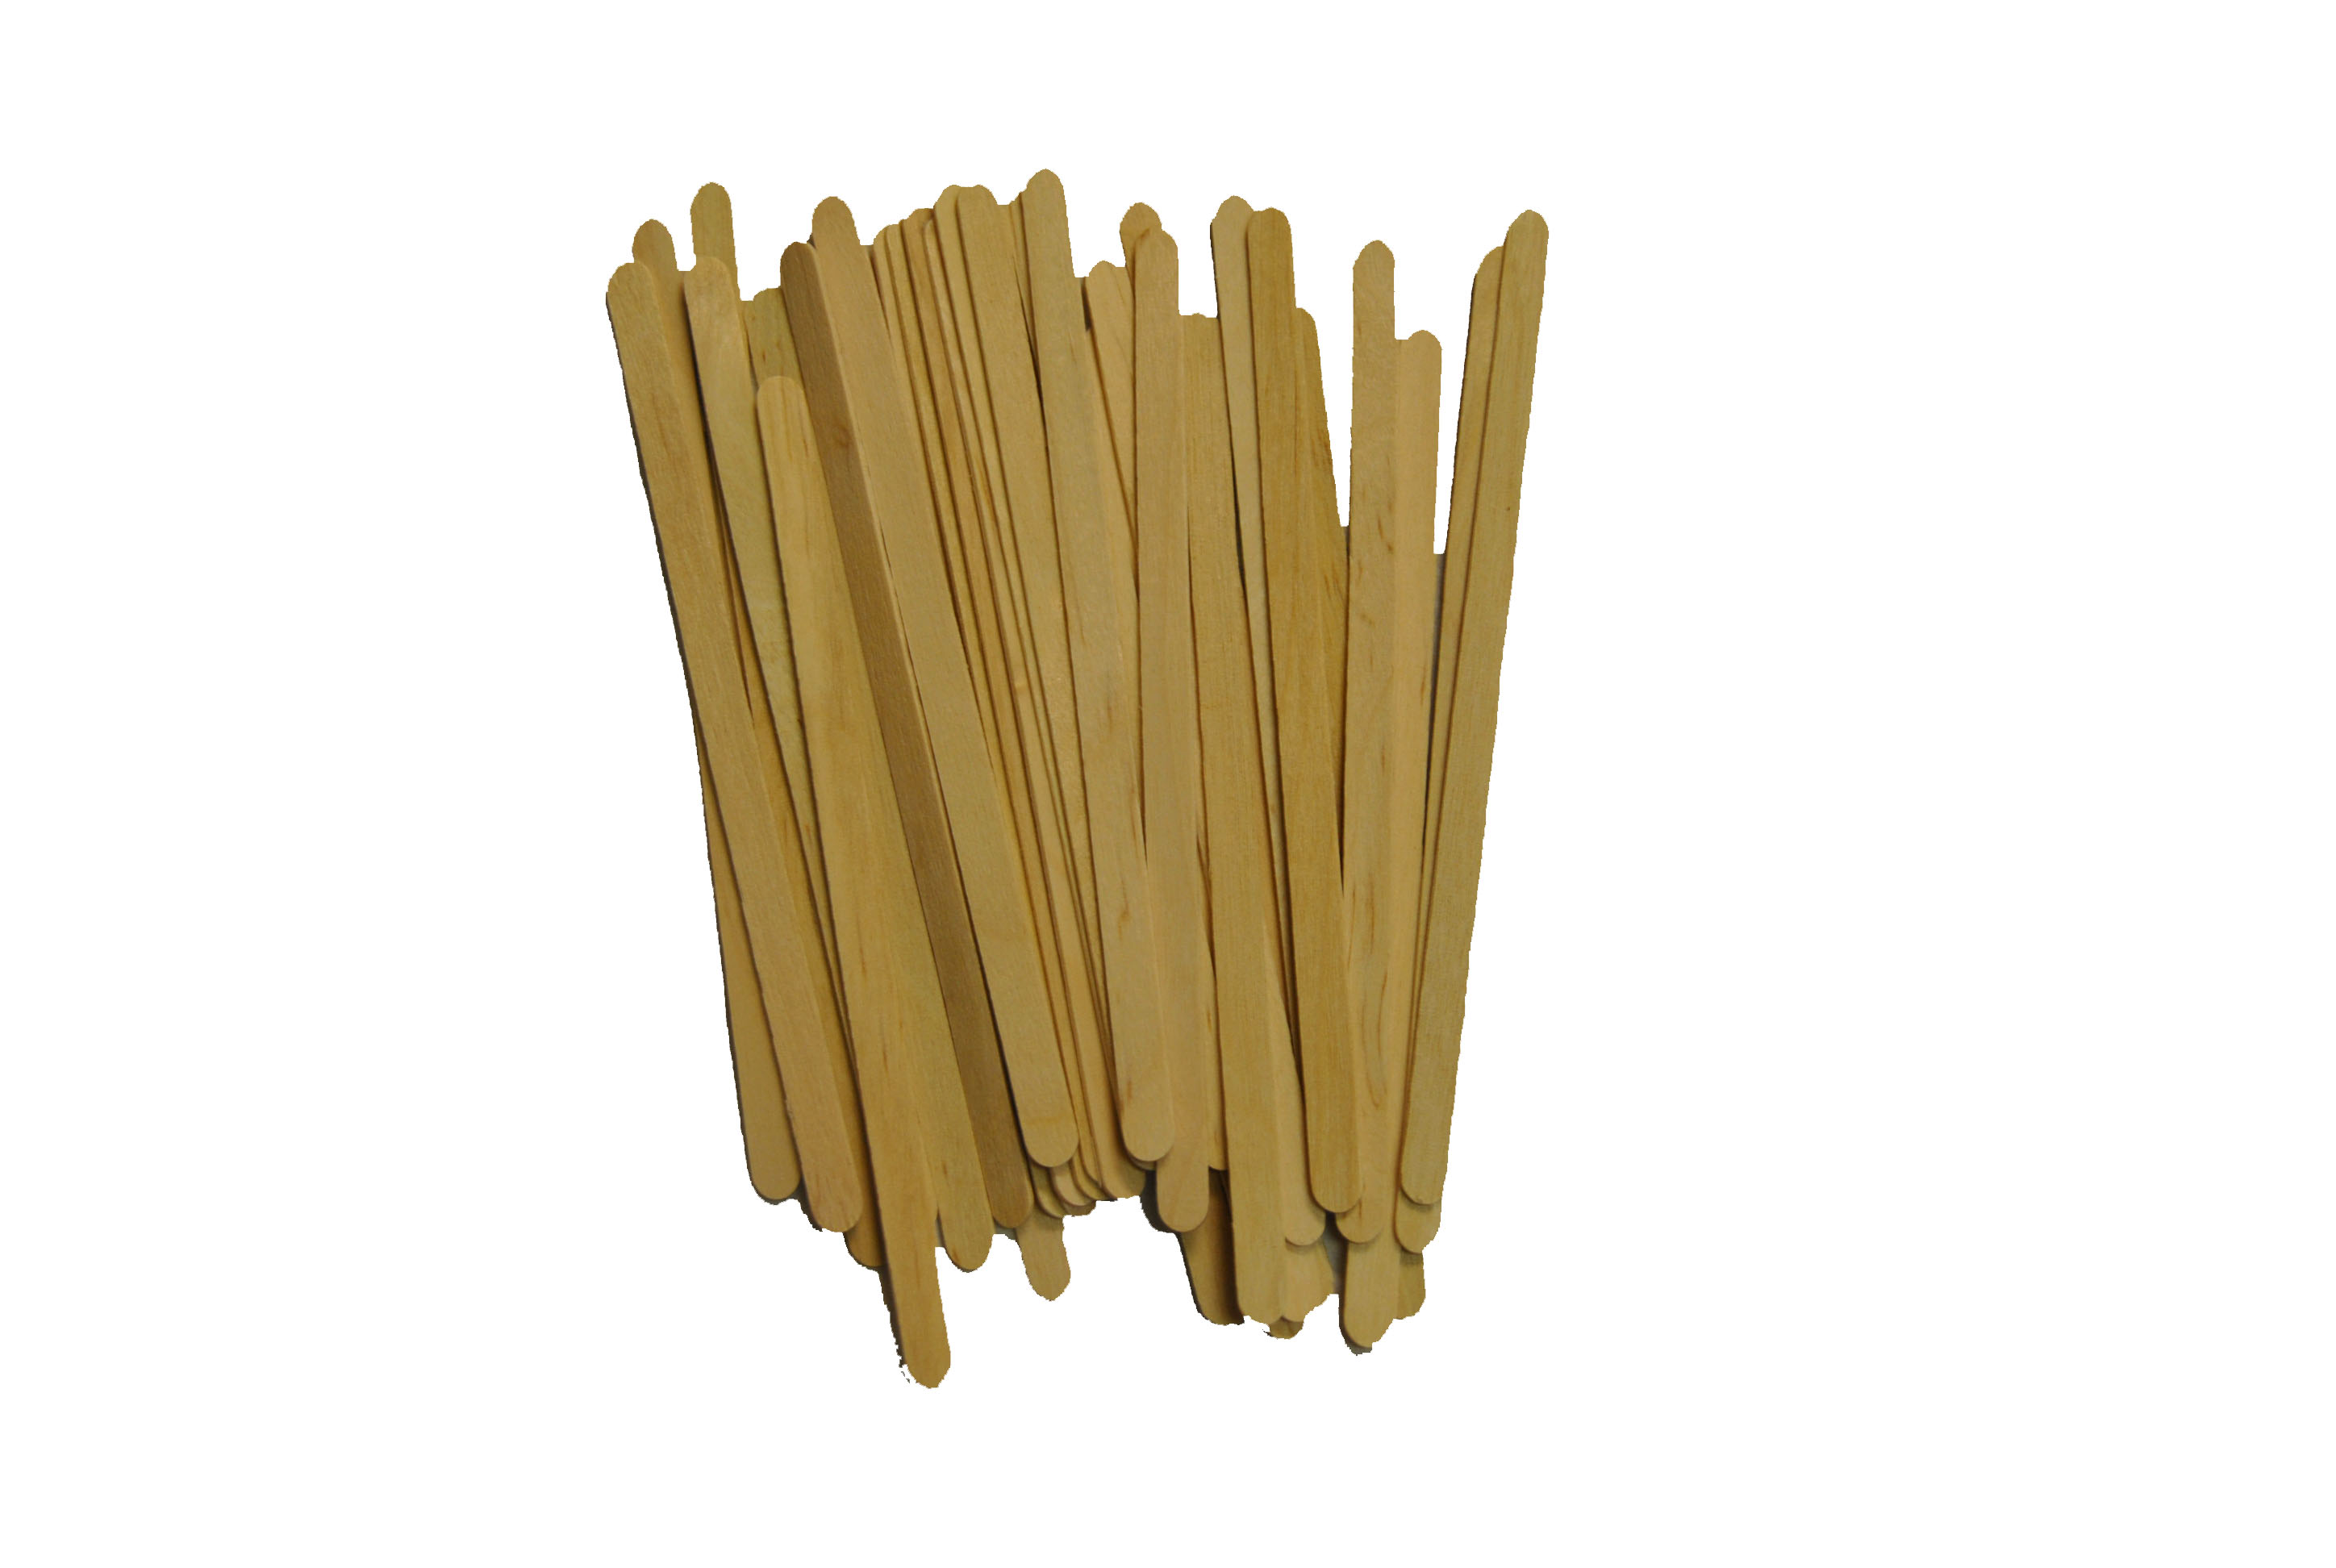 5" Eyebrow Waxing Sticks Round Ends Box of 1,000ct